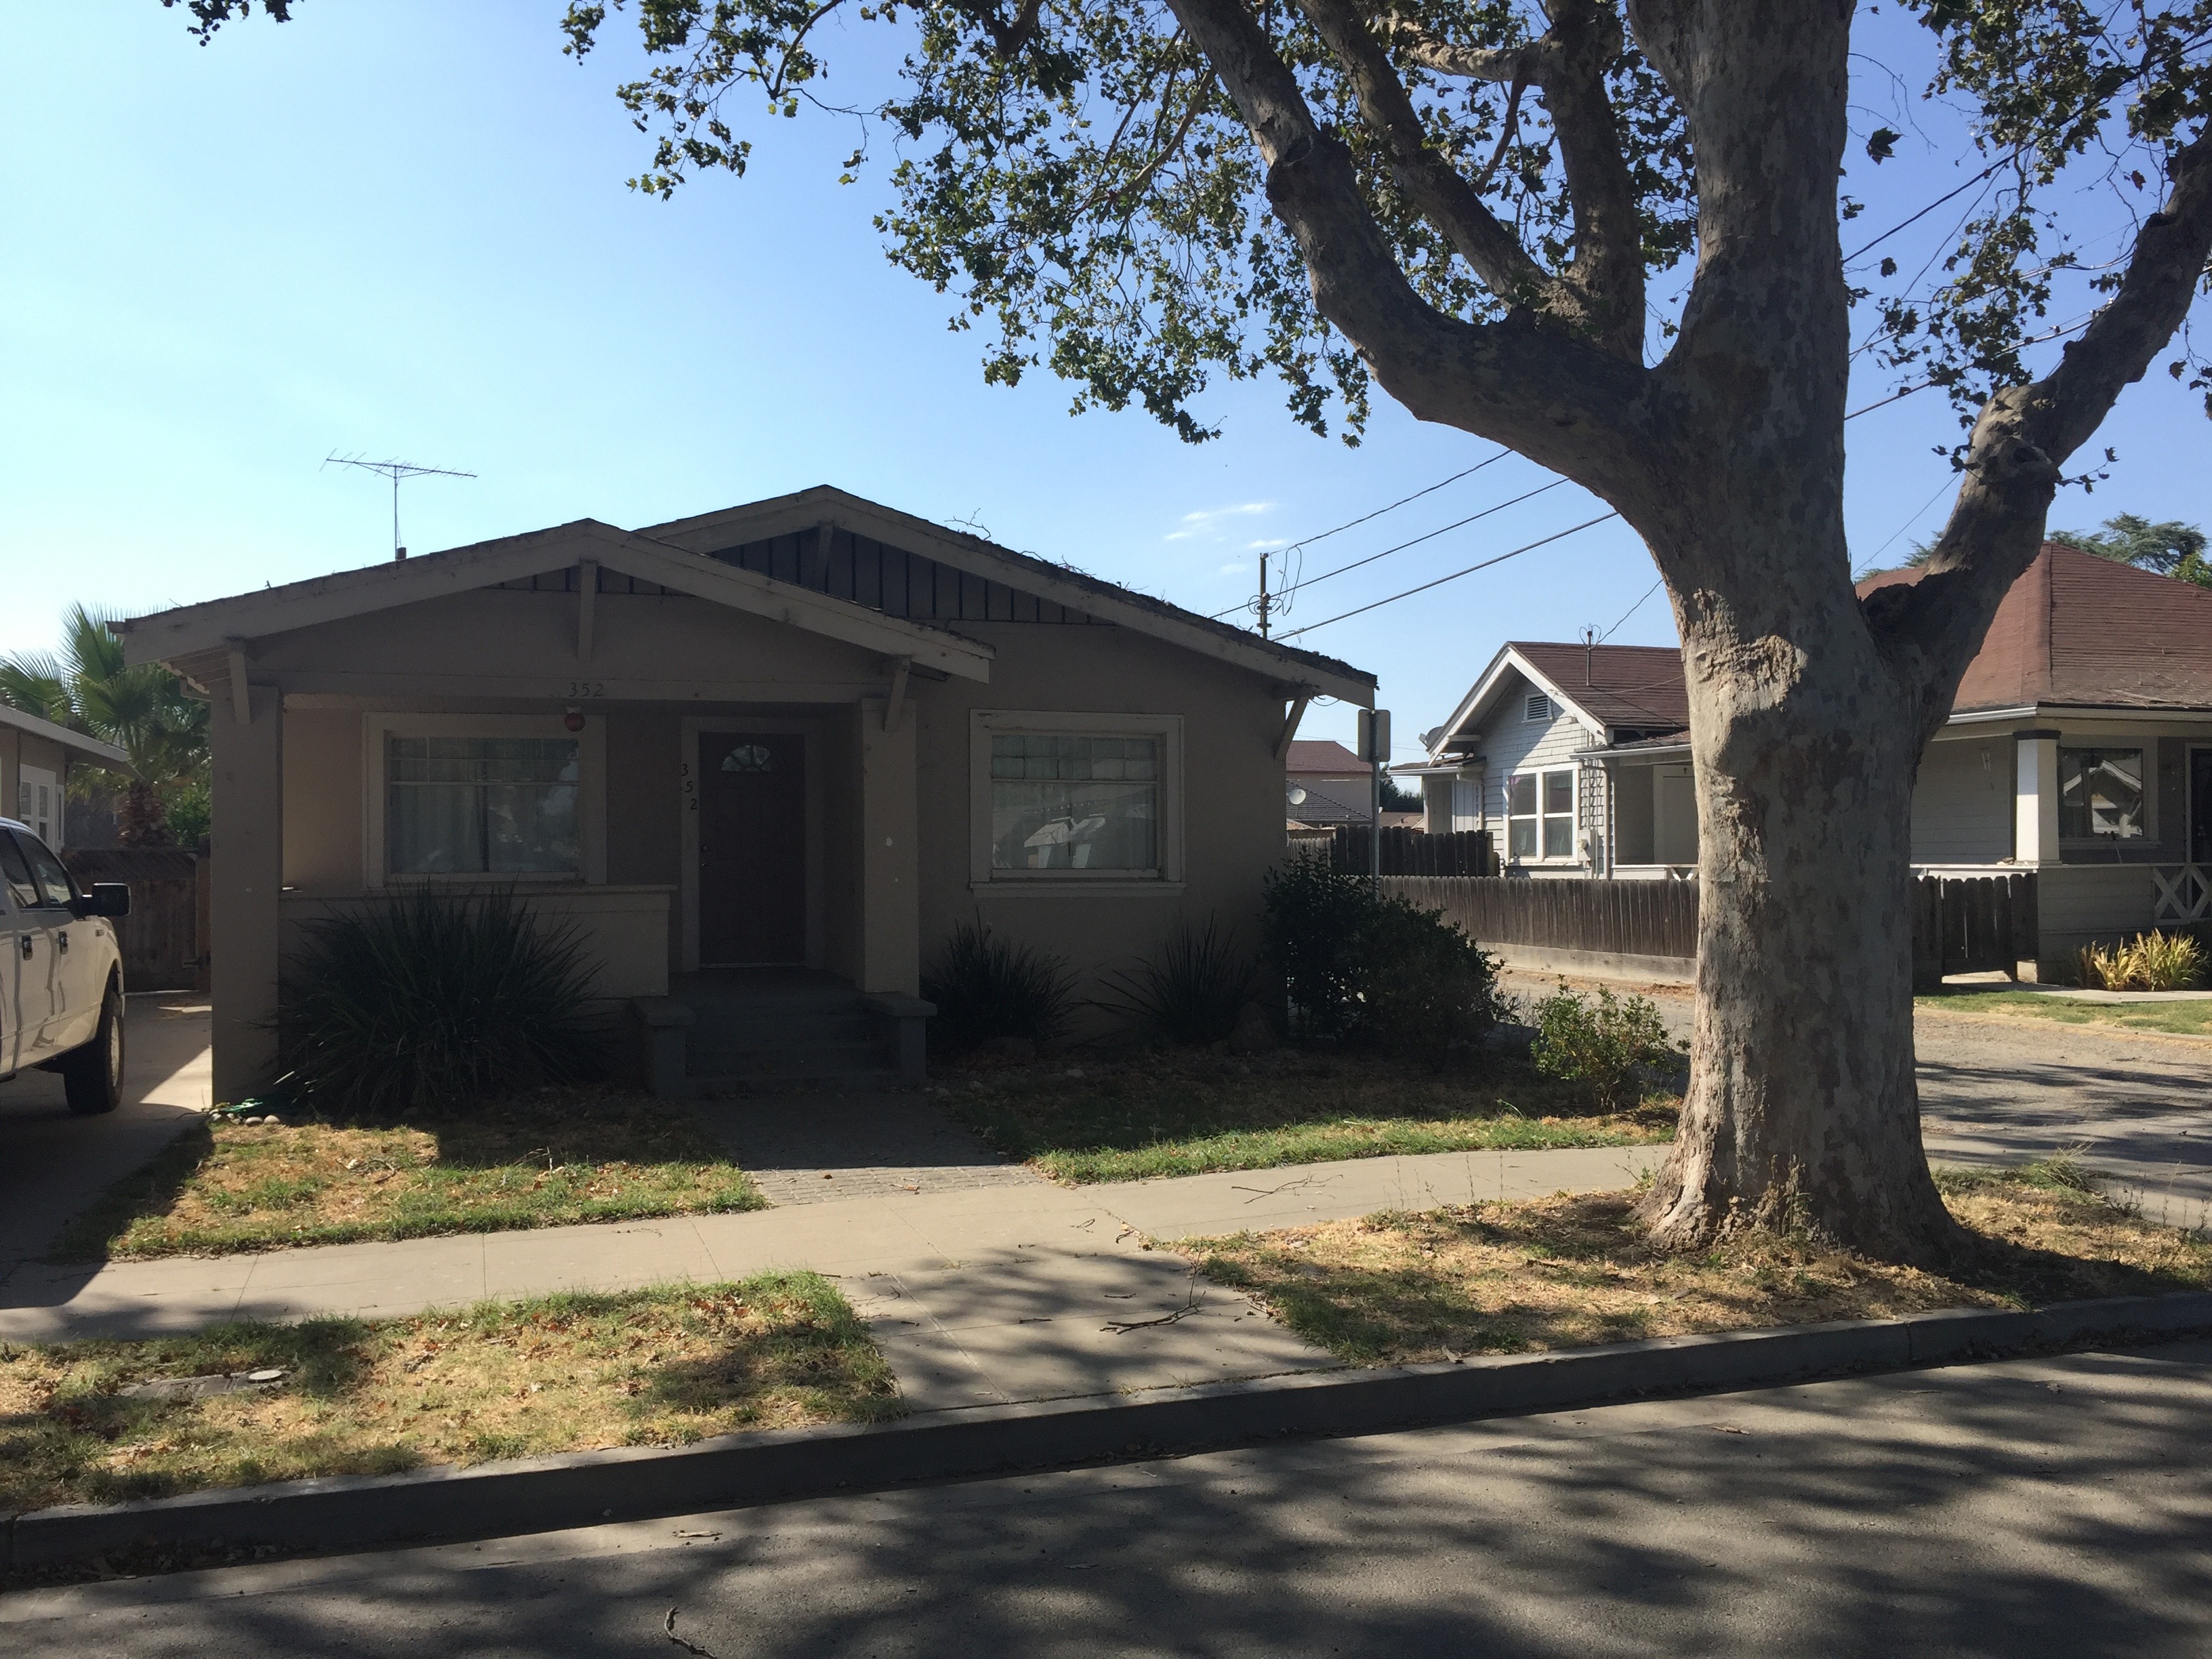 For Rent Mapleton Ave Hollister Ca 95023 1 700month Www